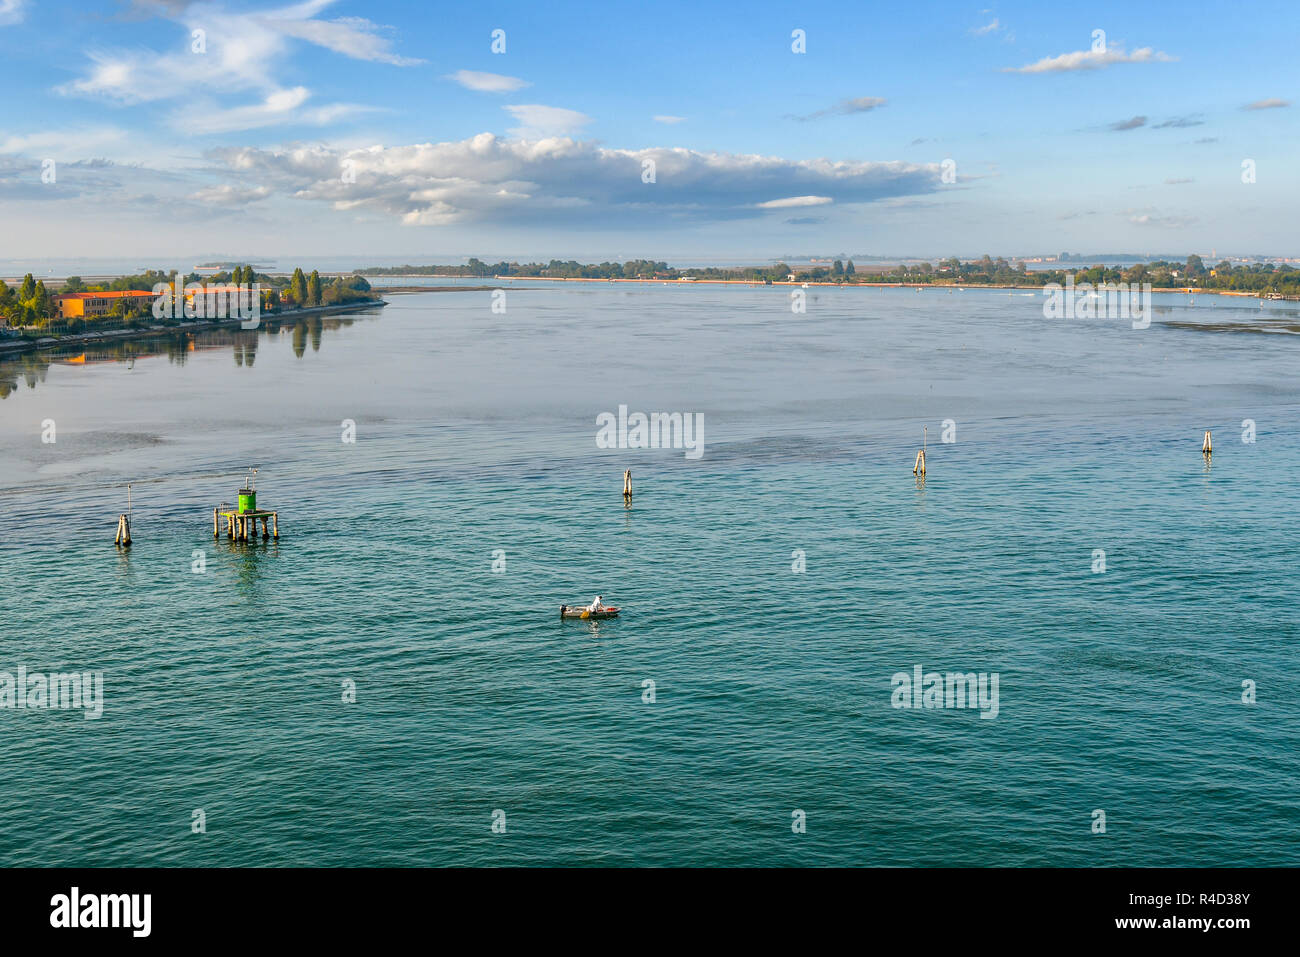 A fisherman in a small boat fishes off the coast of one of the outer islands near the lagoon of Venice, Italy. Stock Photo